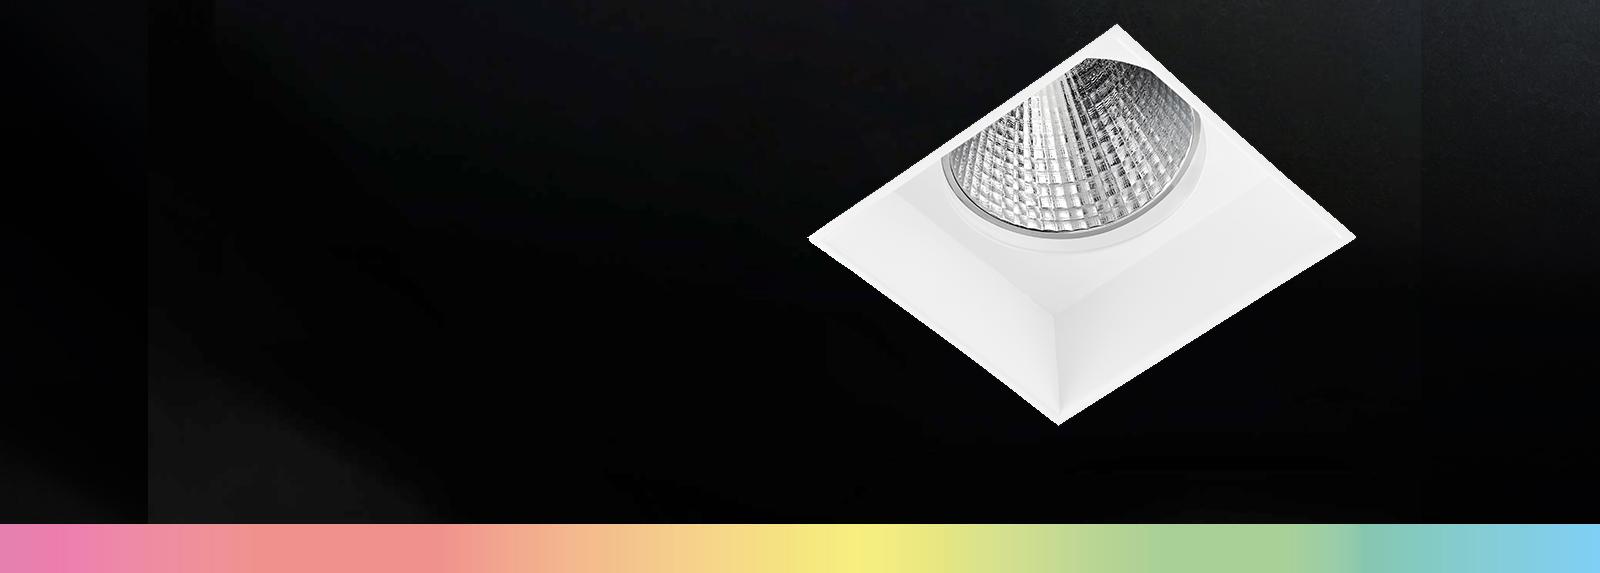 BSQ OPTIMAL DISPLAY | Framless appearance recessed downlights